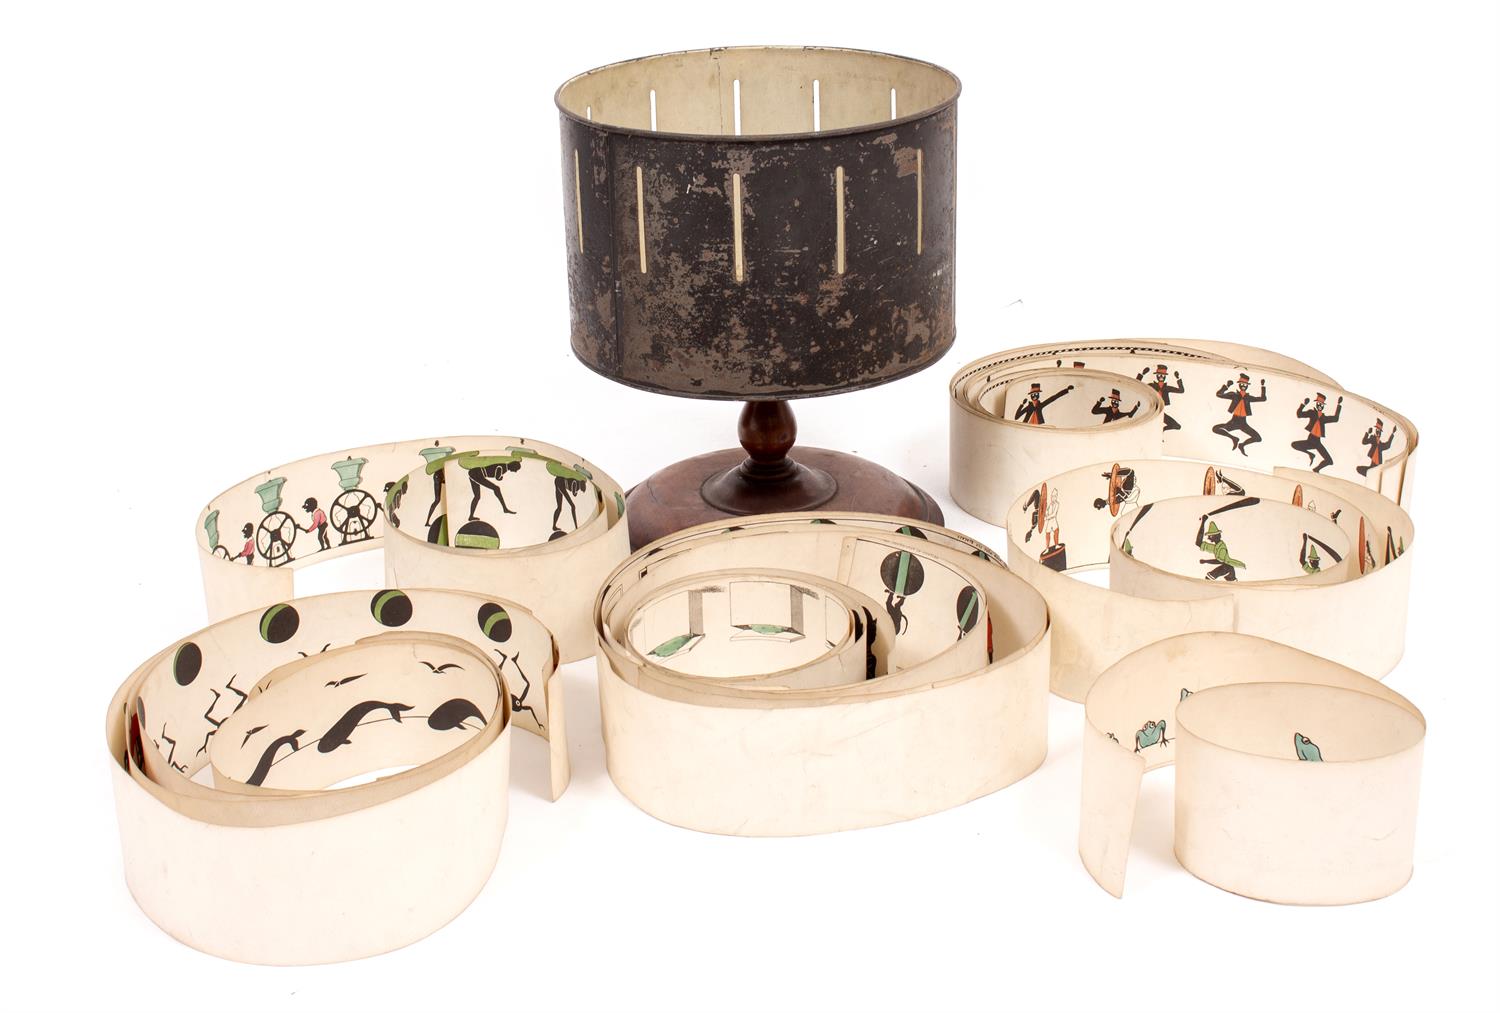 Lot 67 - A 19TH CENTURY 'WHEEL OF LIFE' ZOETROPE